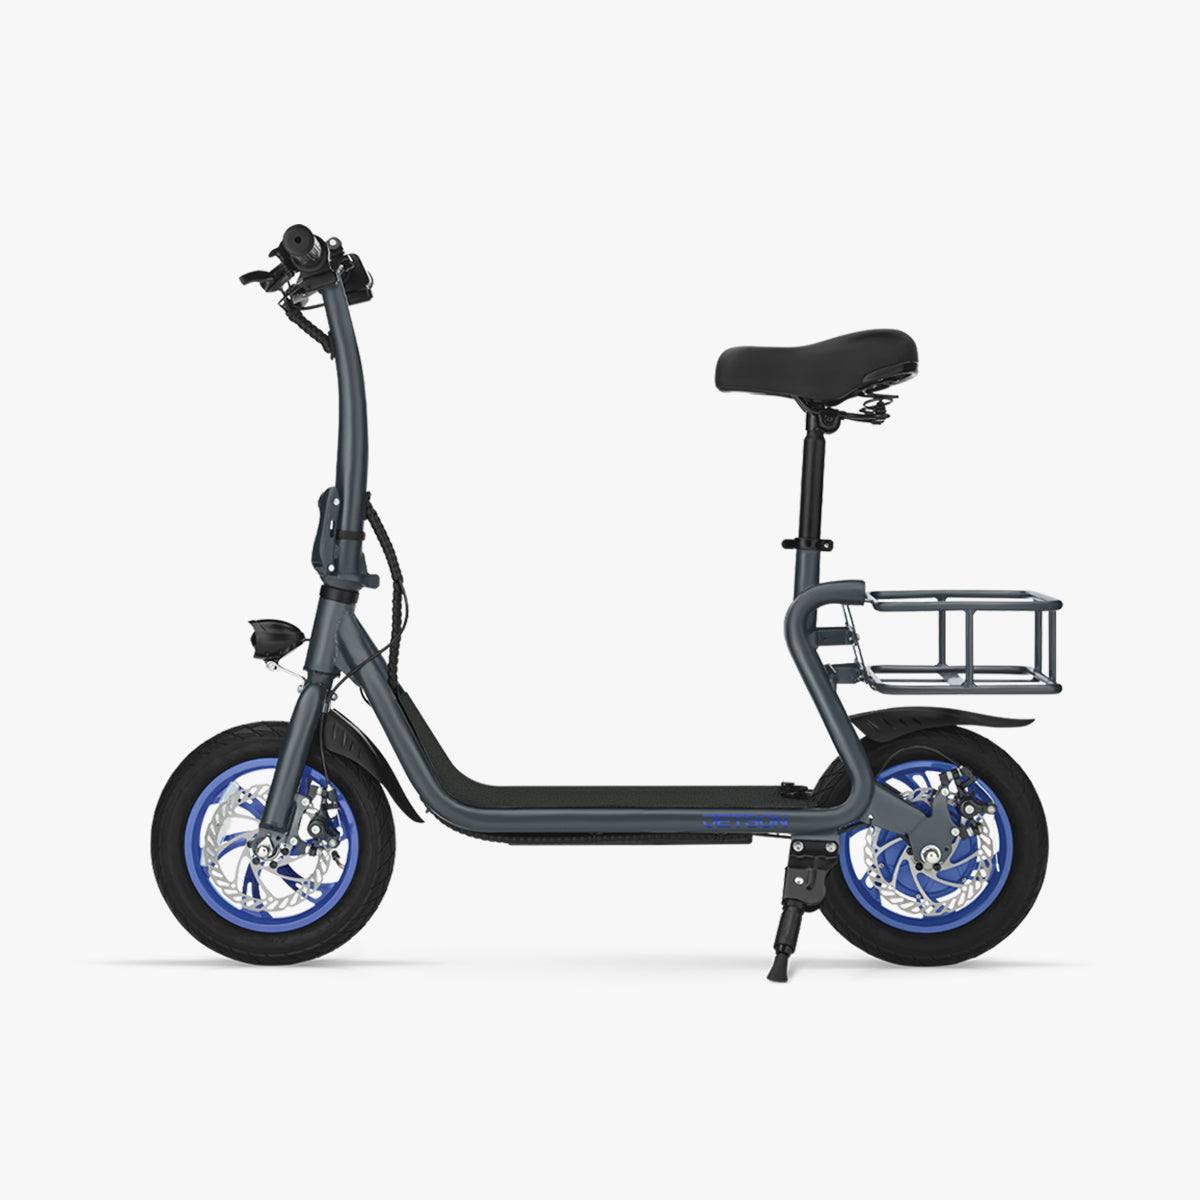 Xiaomi Mi Electric Scooter Essential in stock. - Enjoy the ride